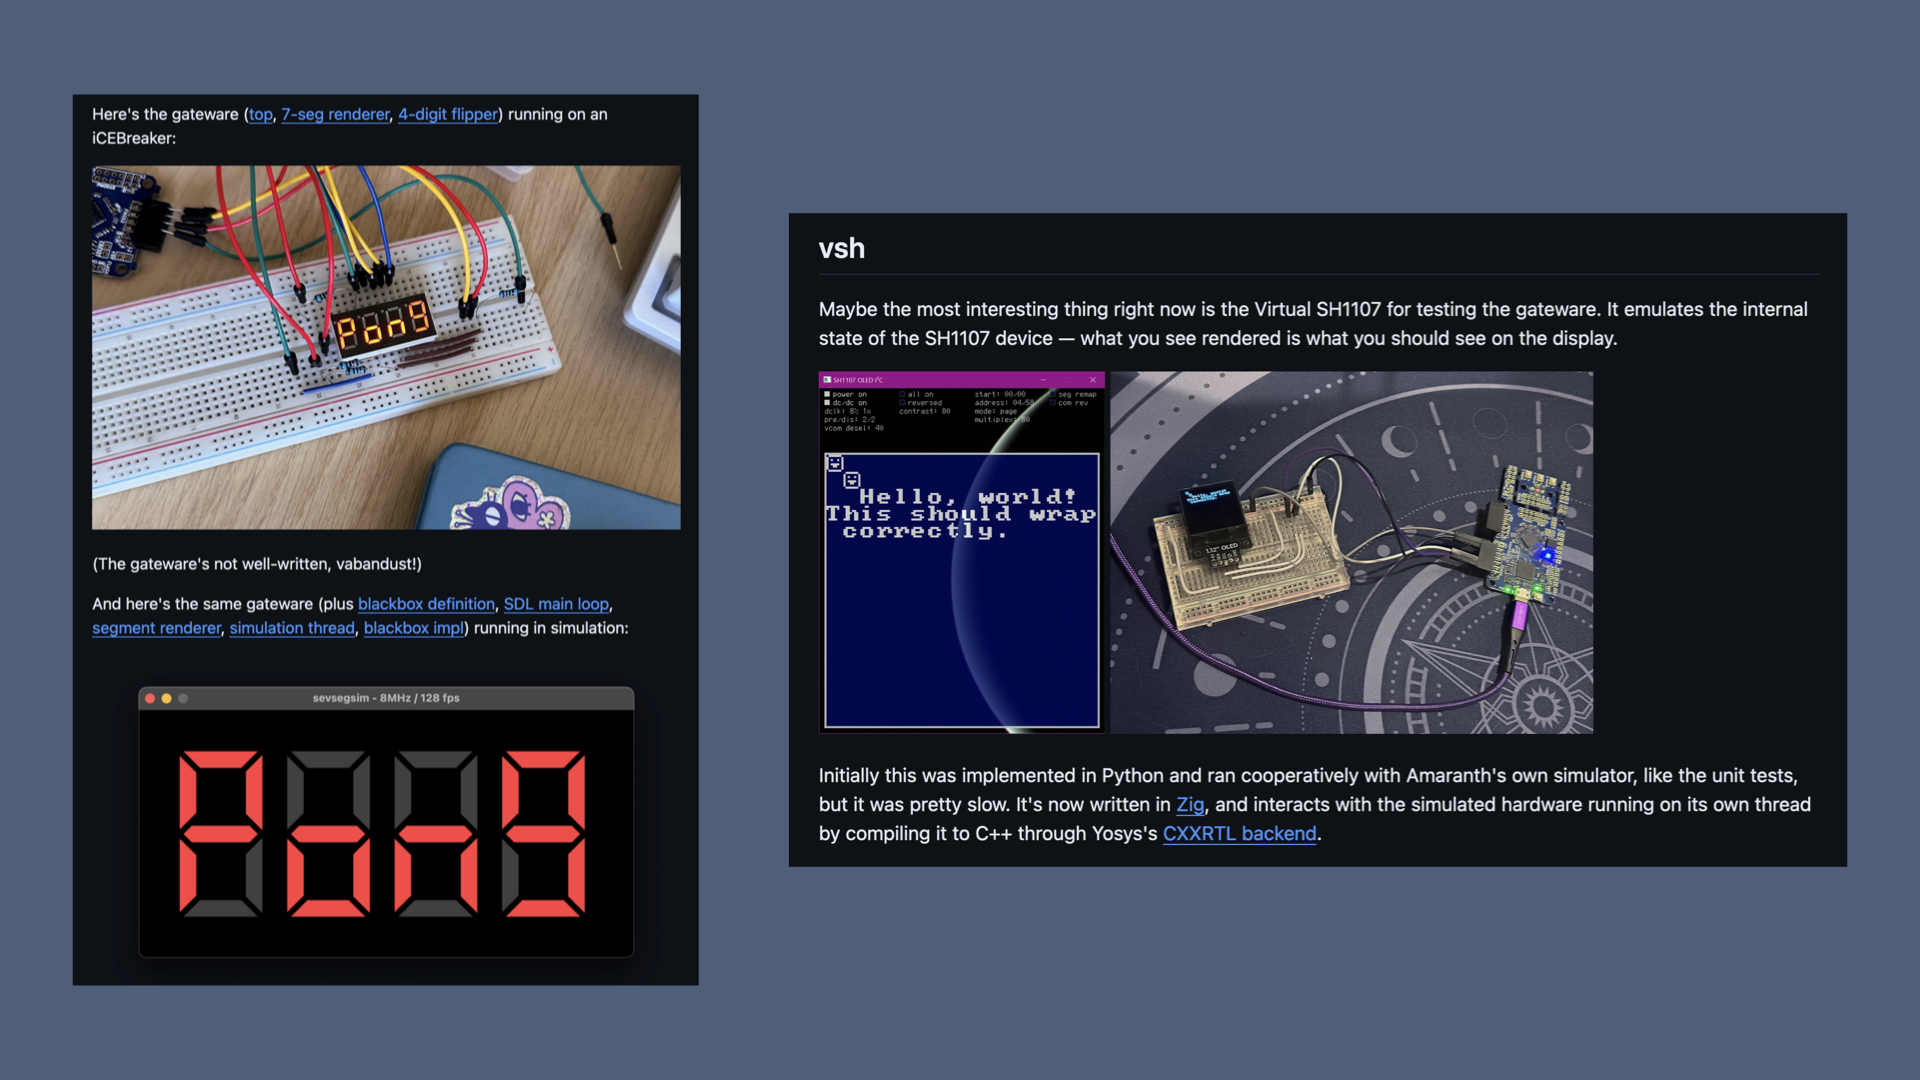 Two README screenshots both demonstrating hardware and matching software simulations. On the left is a photograph of a 4-digit 7-segment display spelling out the word "pong". Underneath is a screenshot of software showing the same display and the same output. On the right is a screenshot of some software demonstrating a 128x128 OLED with some text and ASCII drawing characters on it. There's a photograph of an OLED display wired up to an IceBreaker showing the same output.